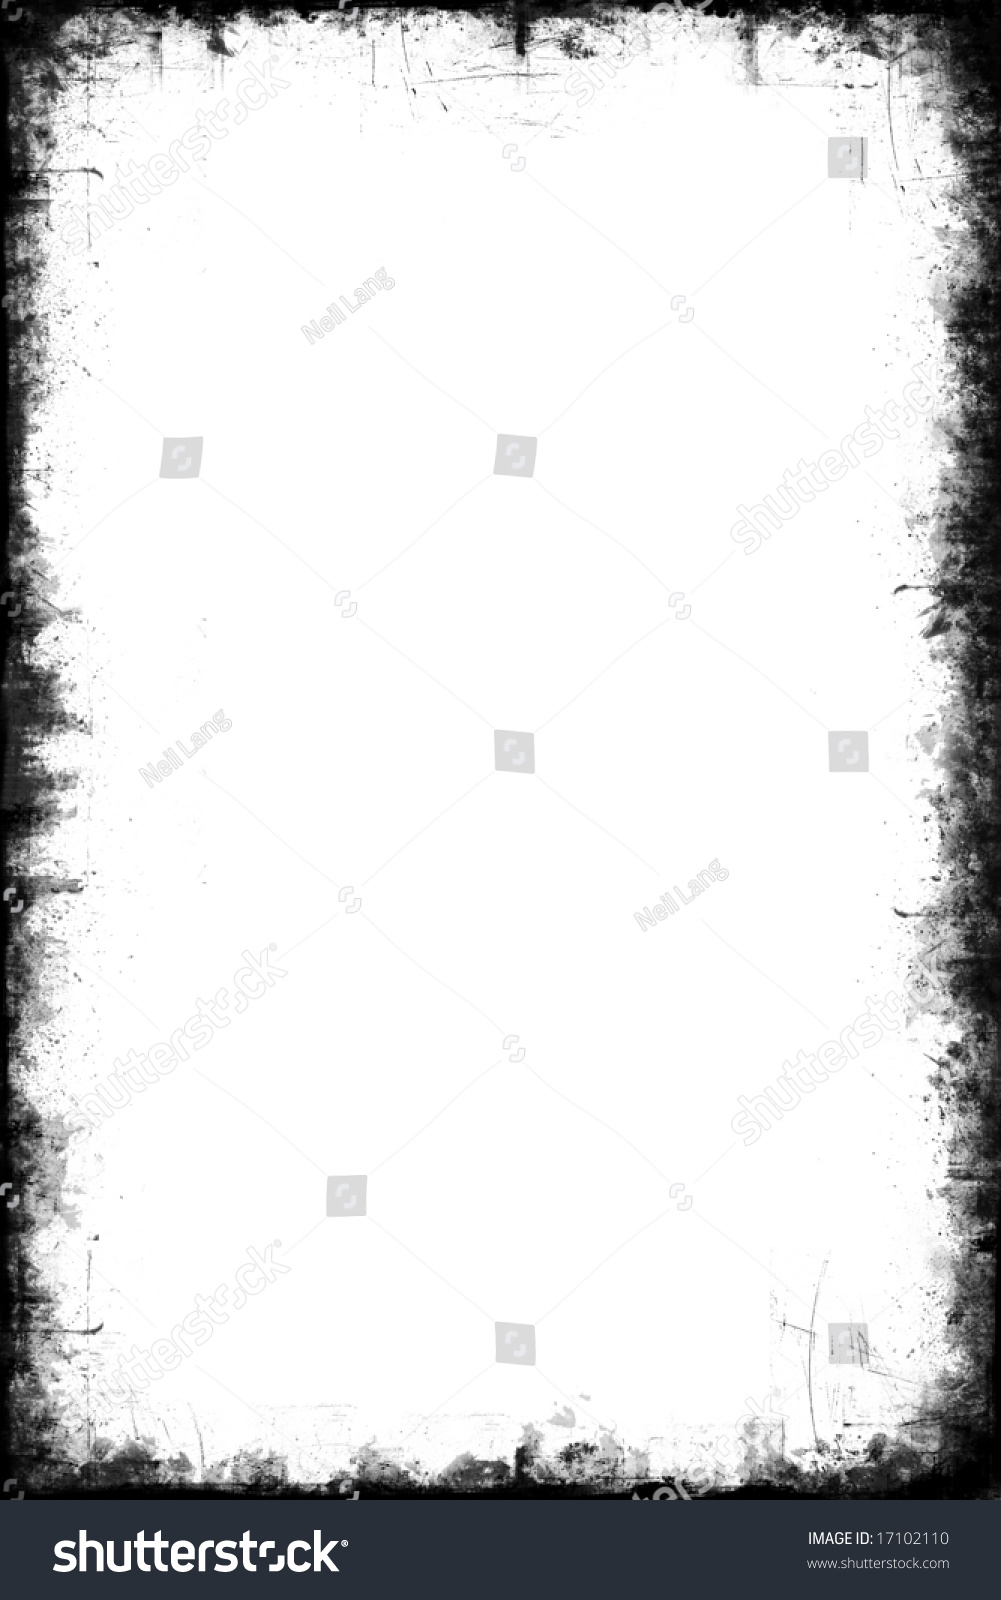 Distressed Black Frame Border With White Blank Middle For Your Own ...